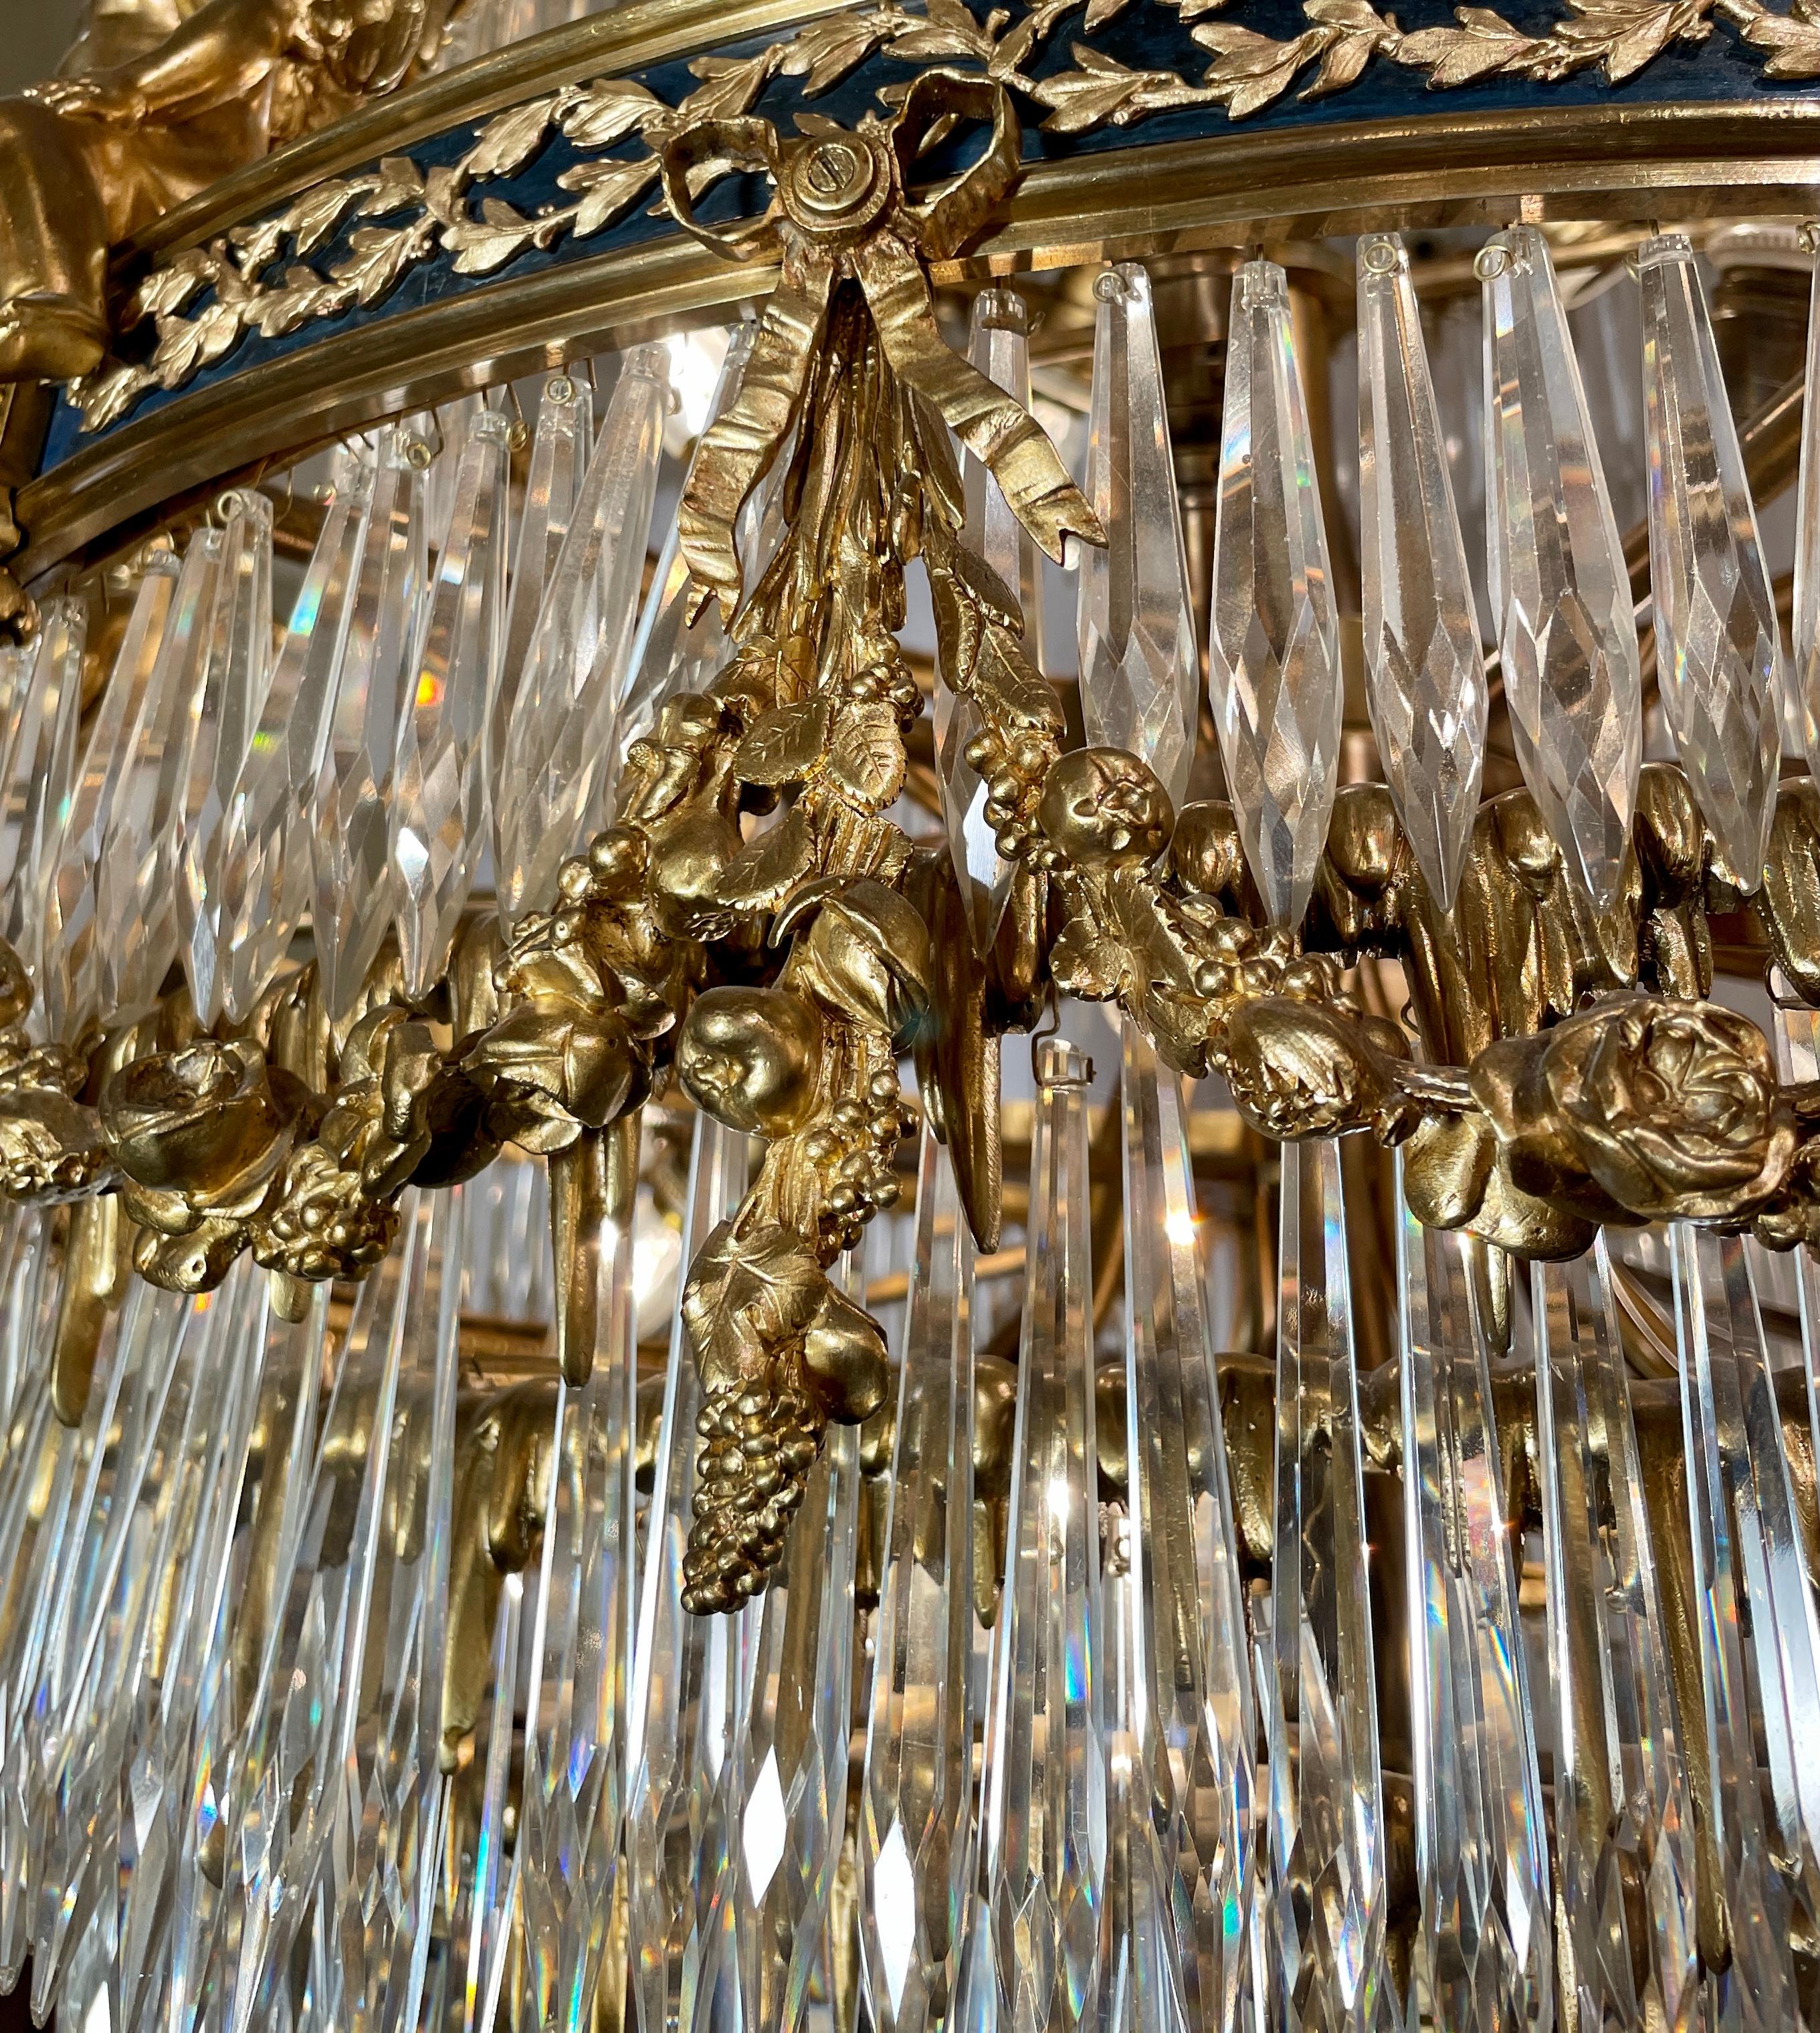 Antique French Baccarat Crystal & Bronze D'Ore Waterfall Chandelier, Circa 1880s For Sale 7